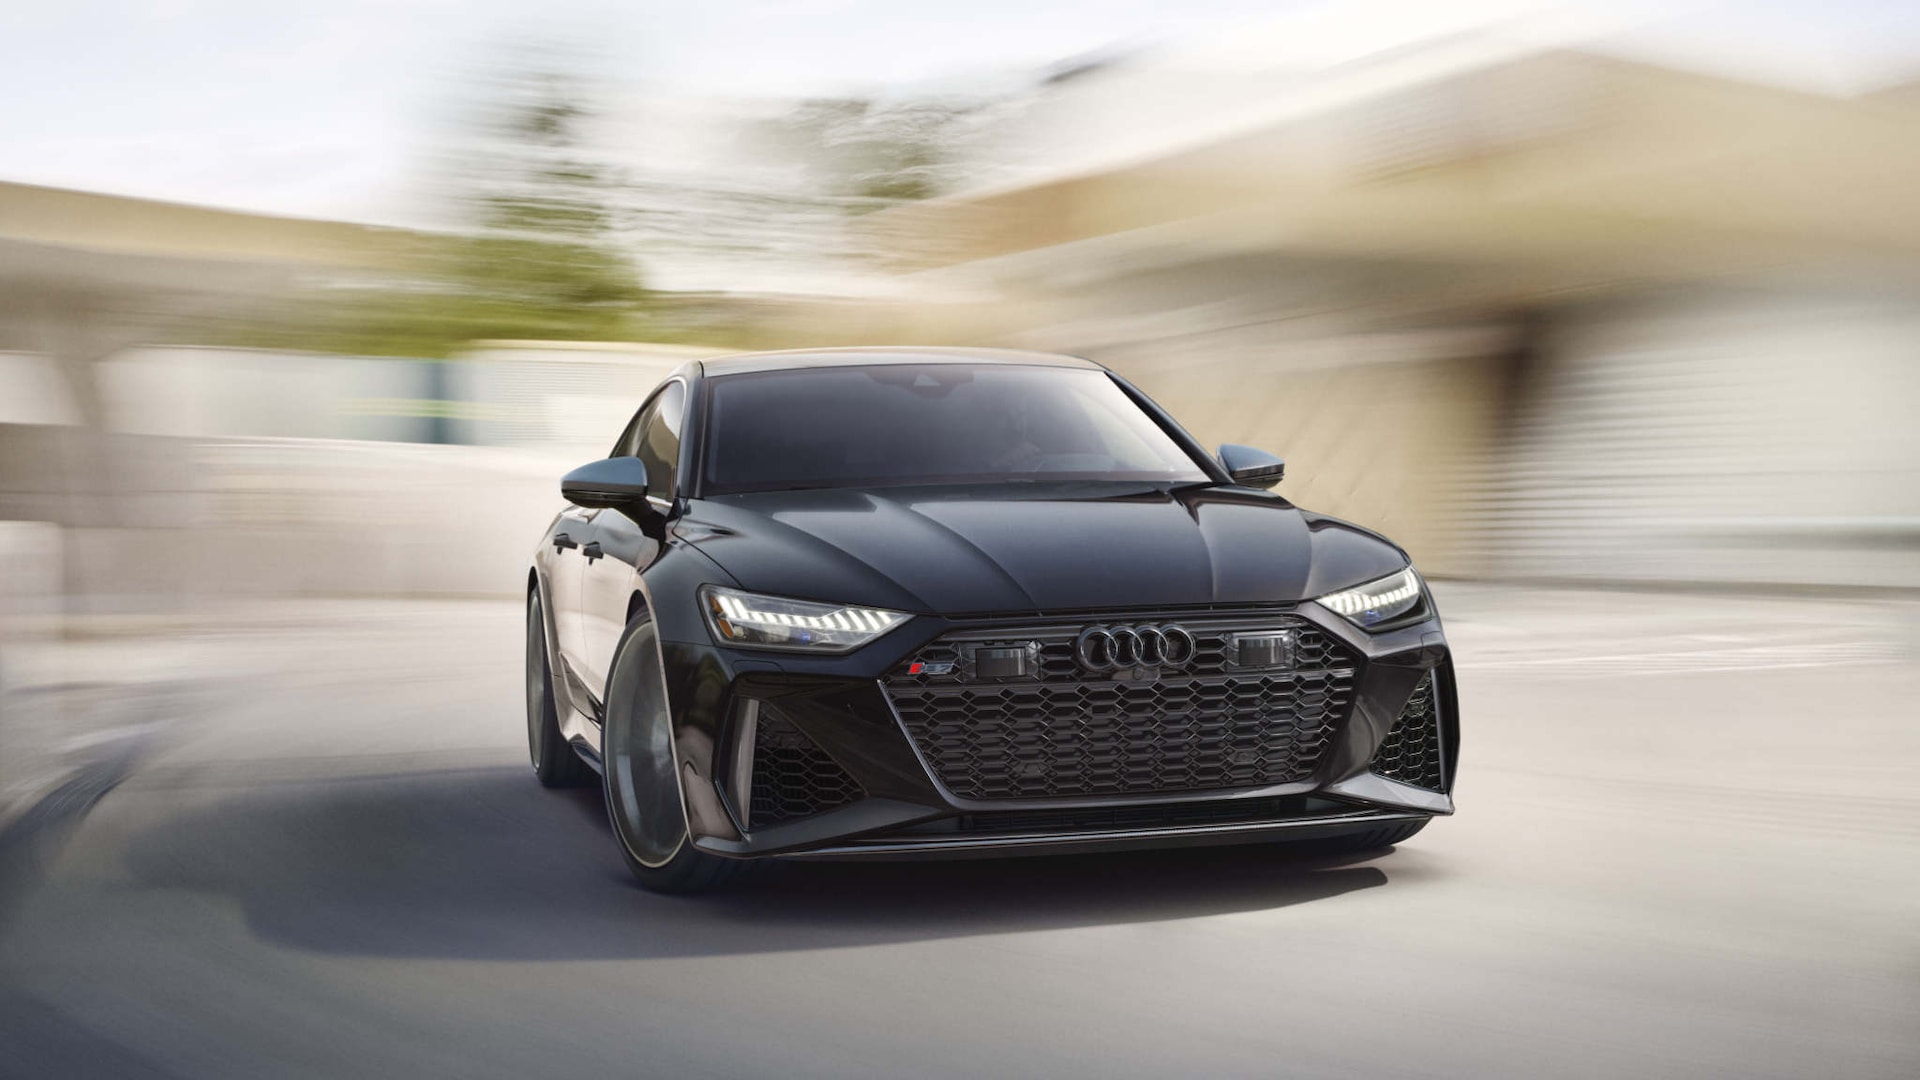 Car Noir: The 2022 Audi RS7 Exclusive Edition Shows Its Dark Side